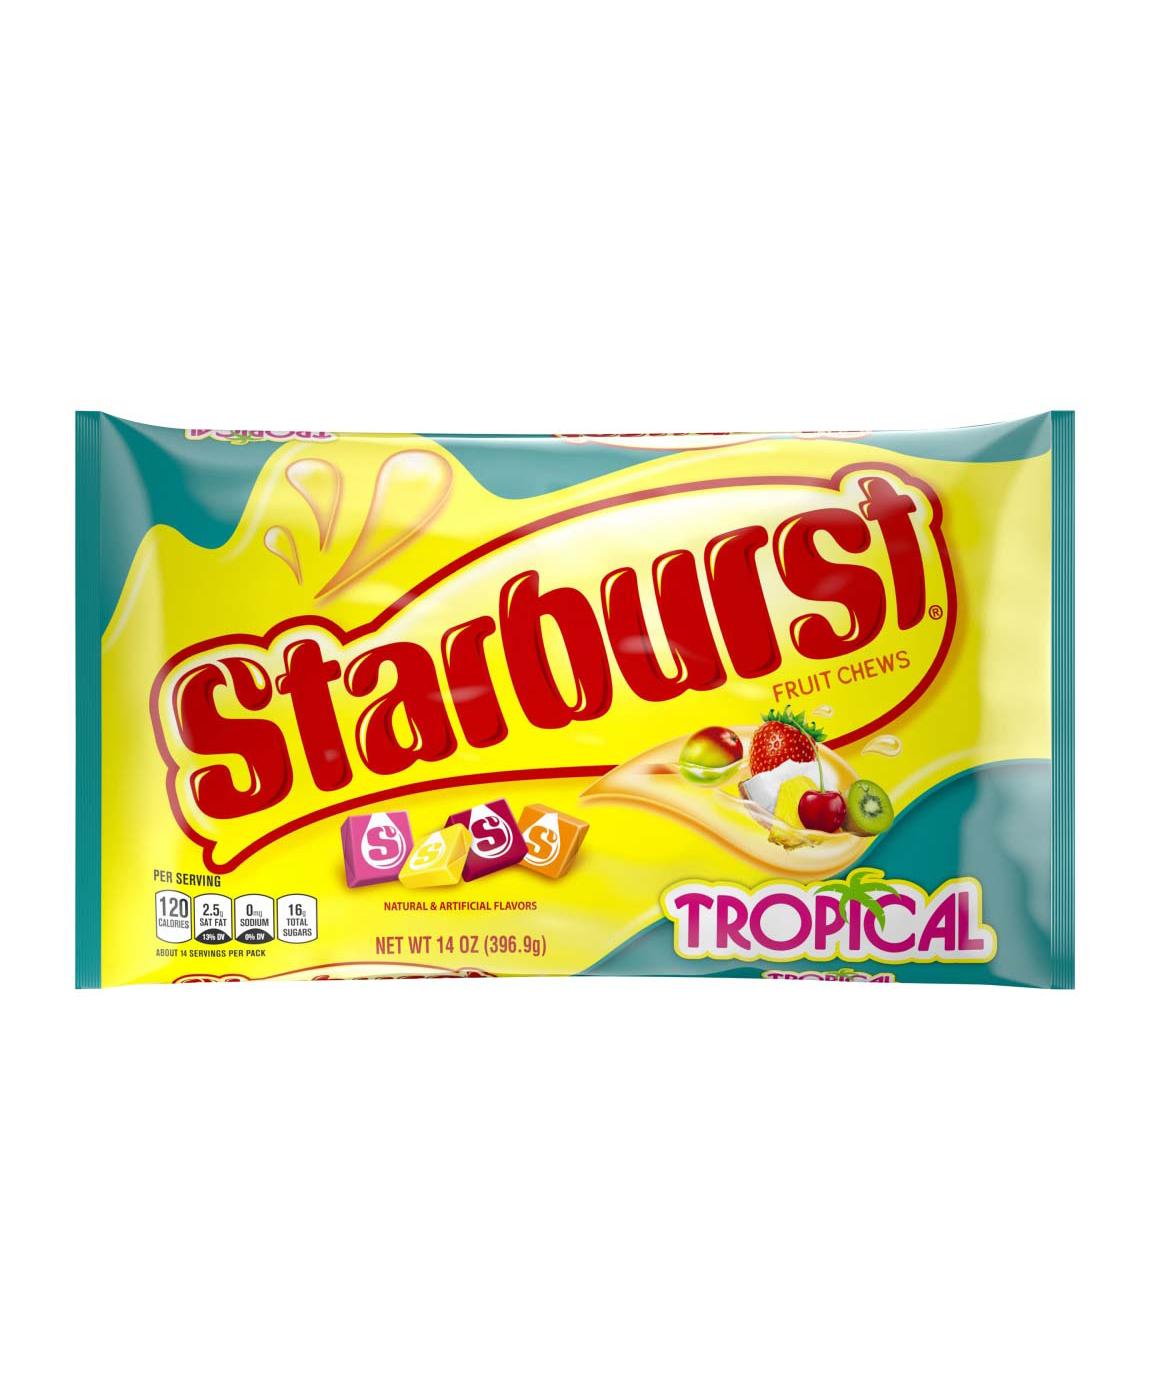 Starburst Tropical Fruit Chews Candy Bag; image 1 of 7